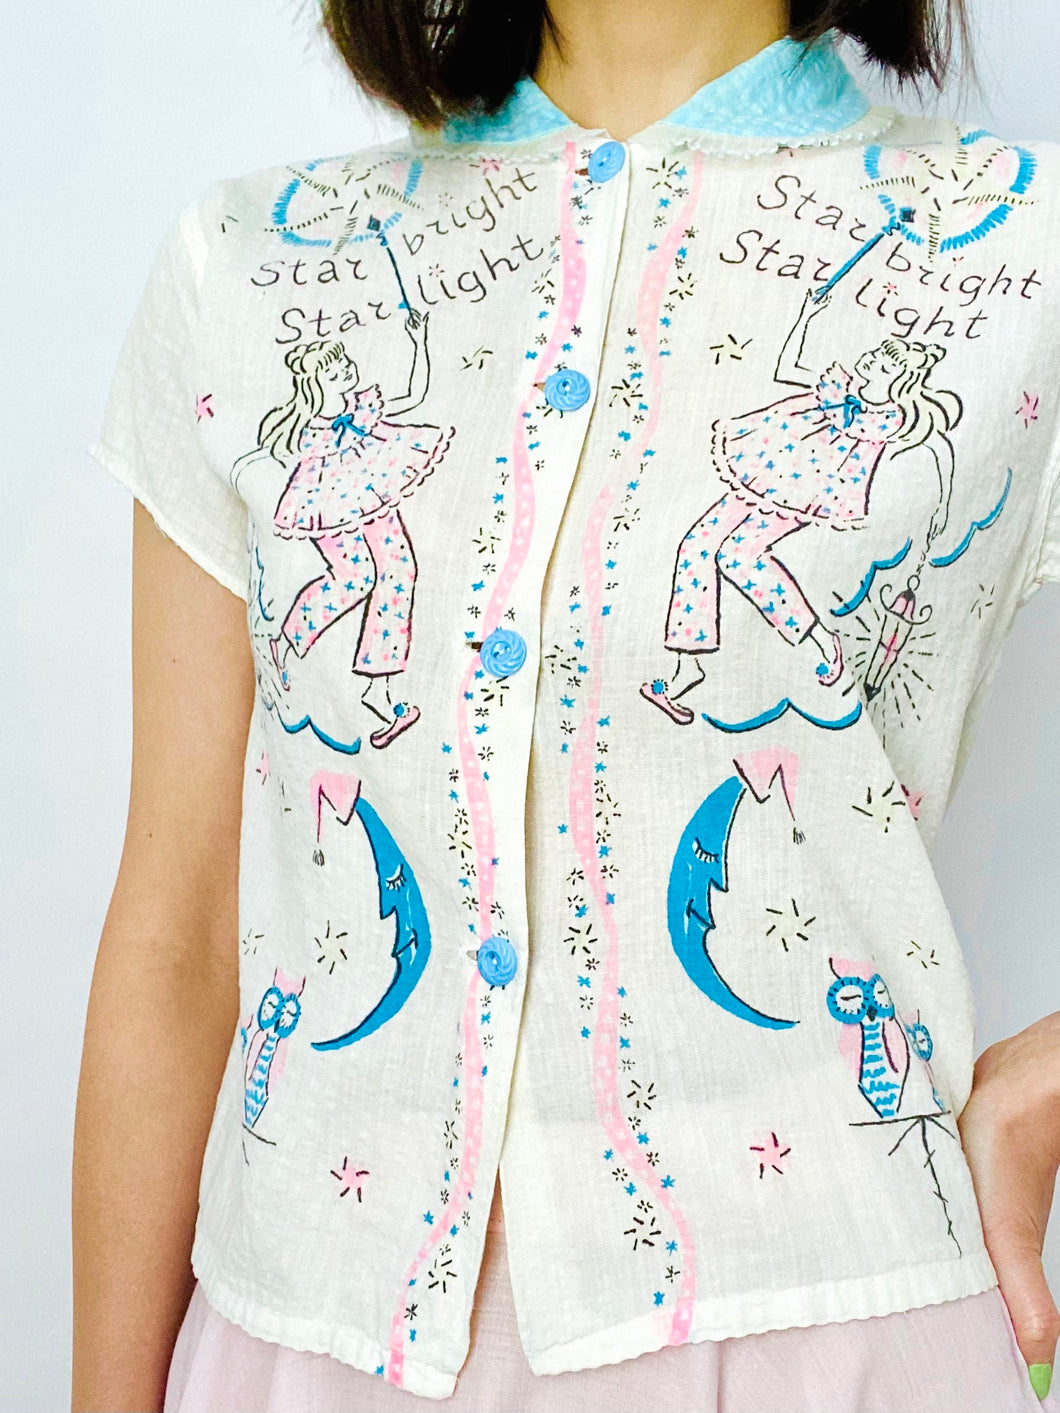 Vintage cotton lady and stars novelty print top